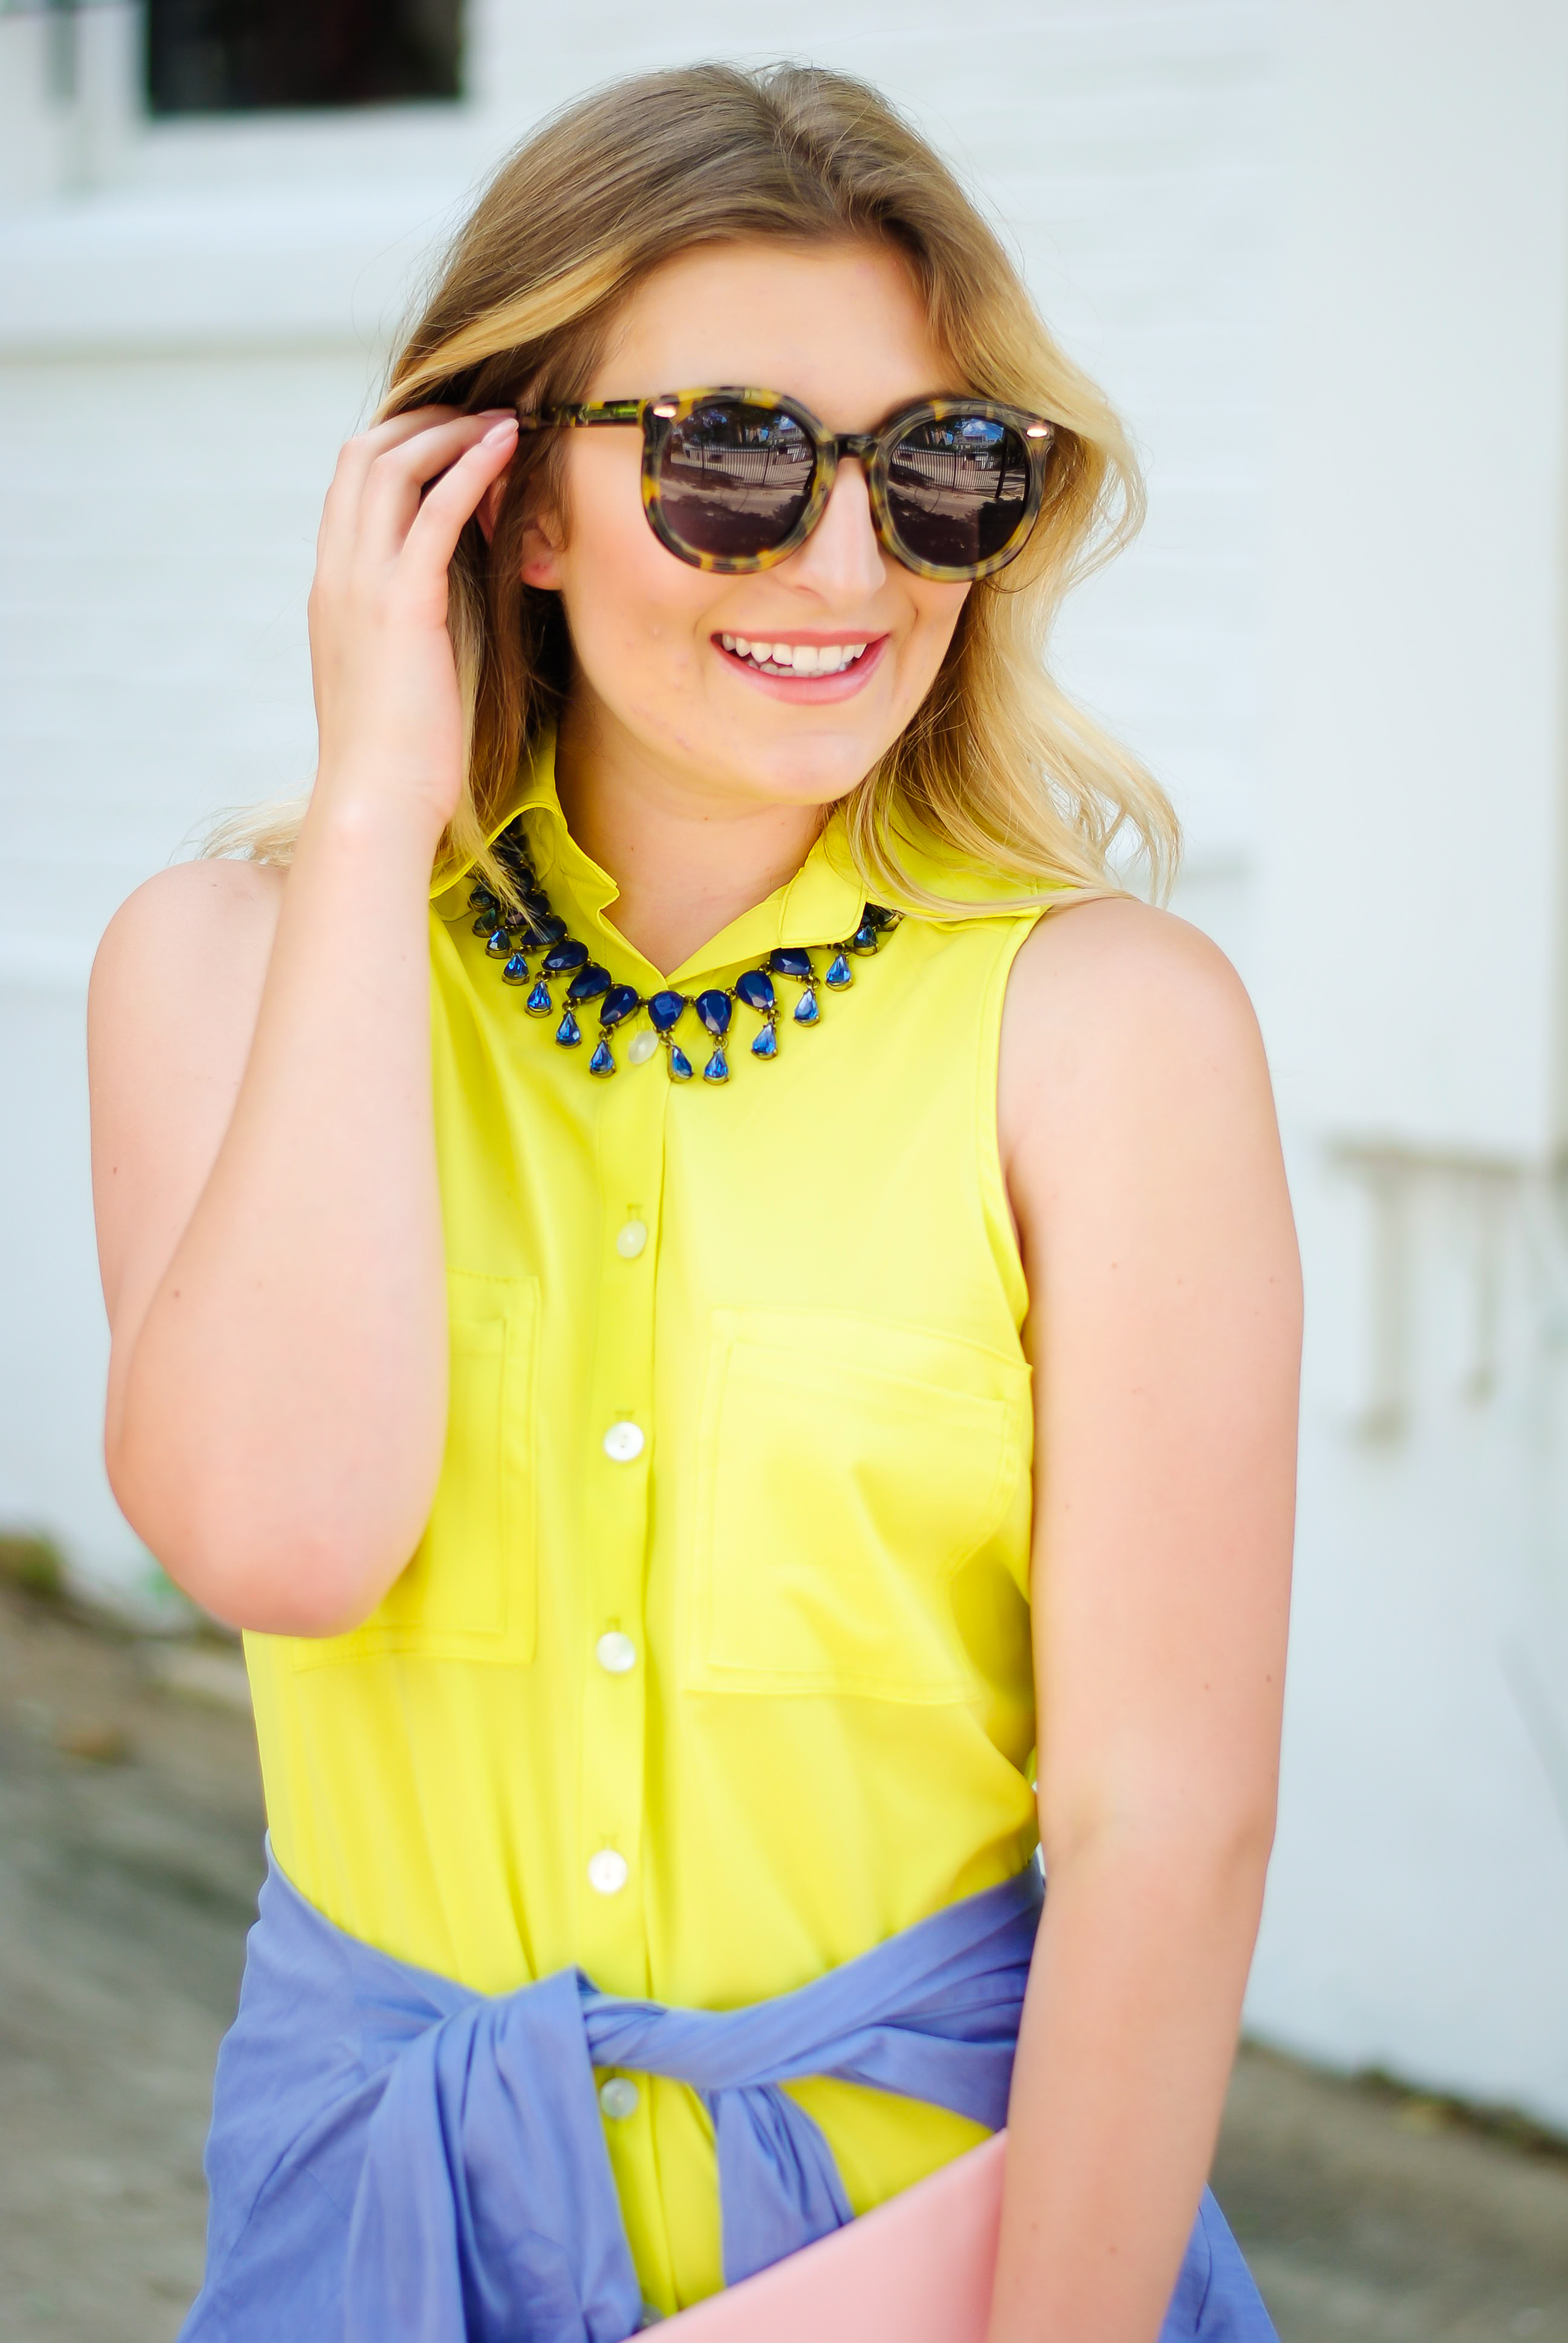 business casual wear | Audrey Madison Stowe Blog